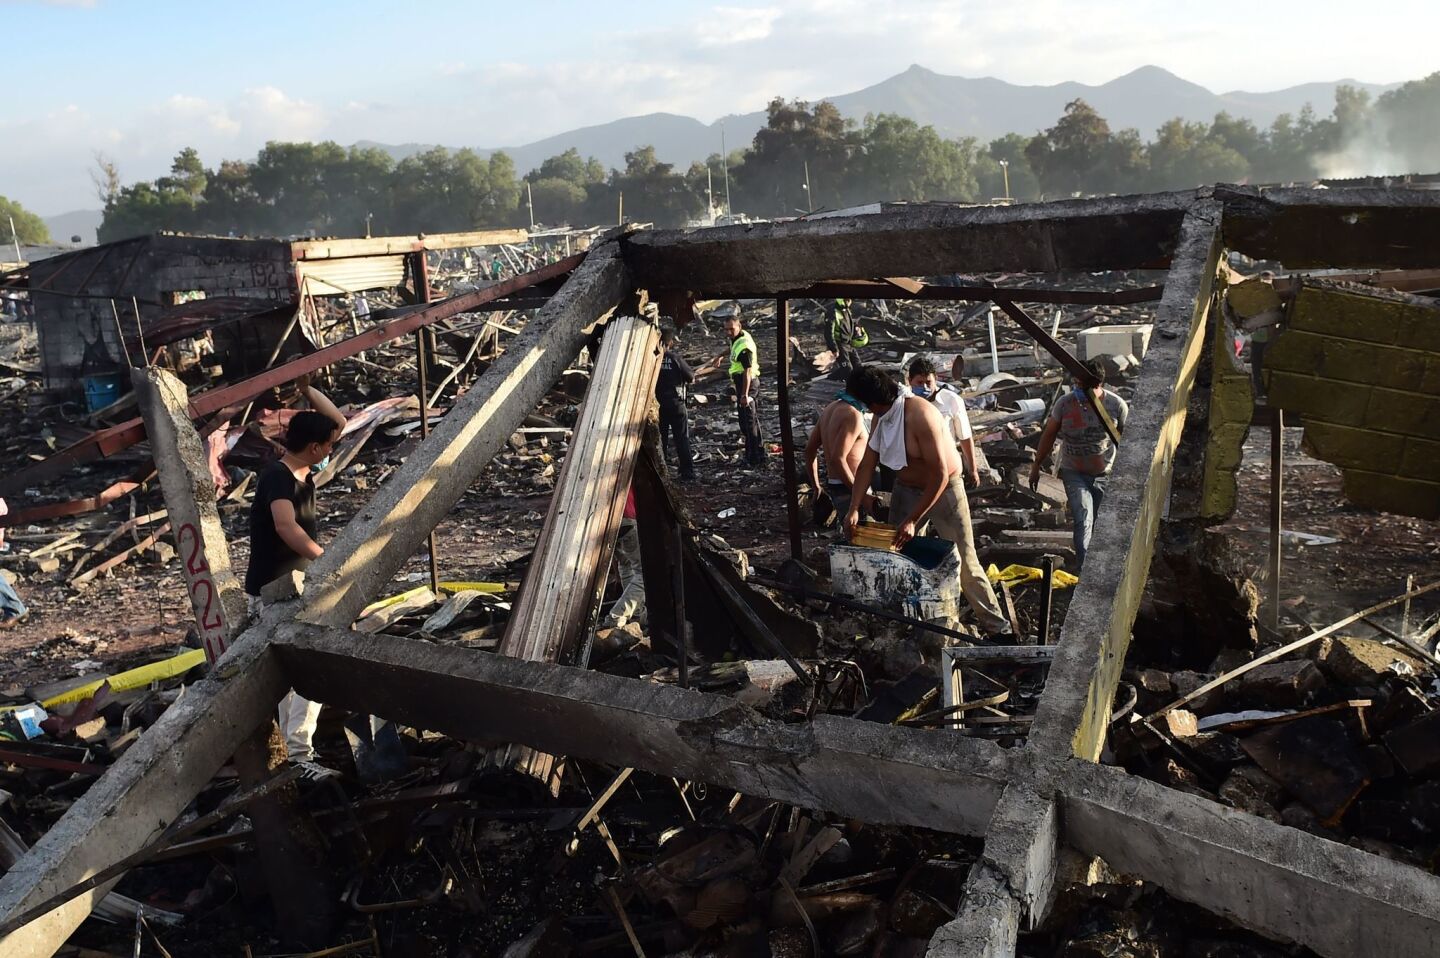 Survivors search the ruins left by a series of explosions at a fireworks market north of Mexico City.